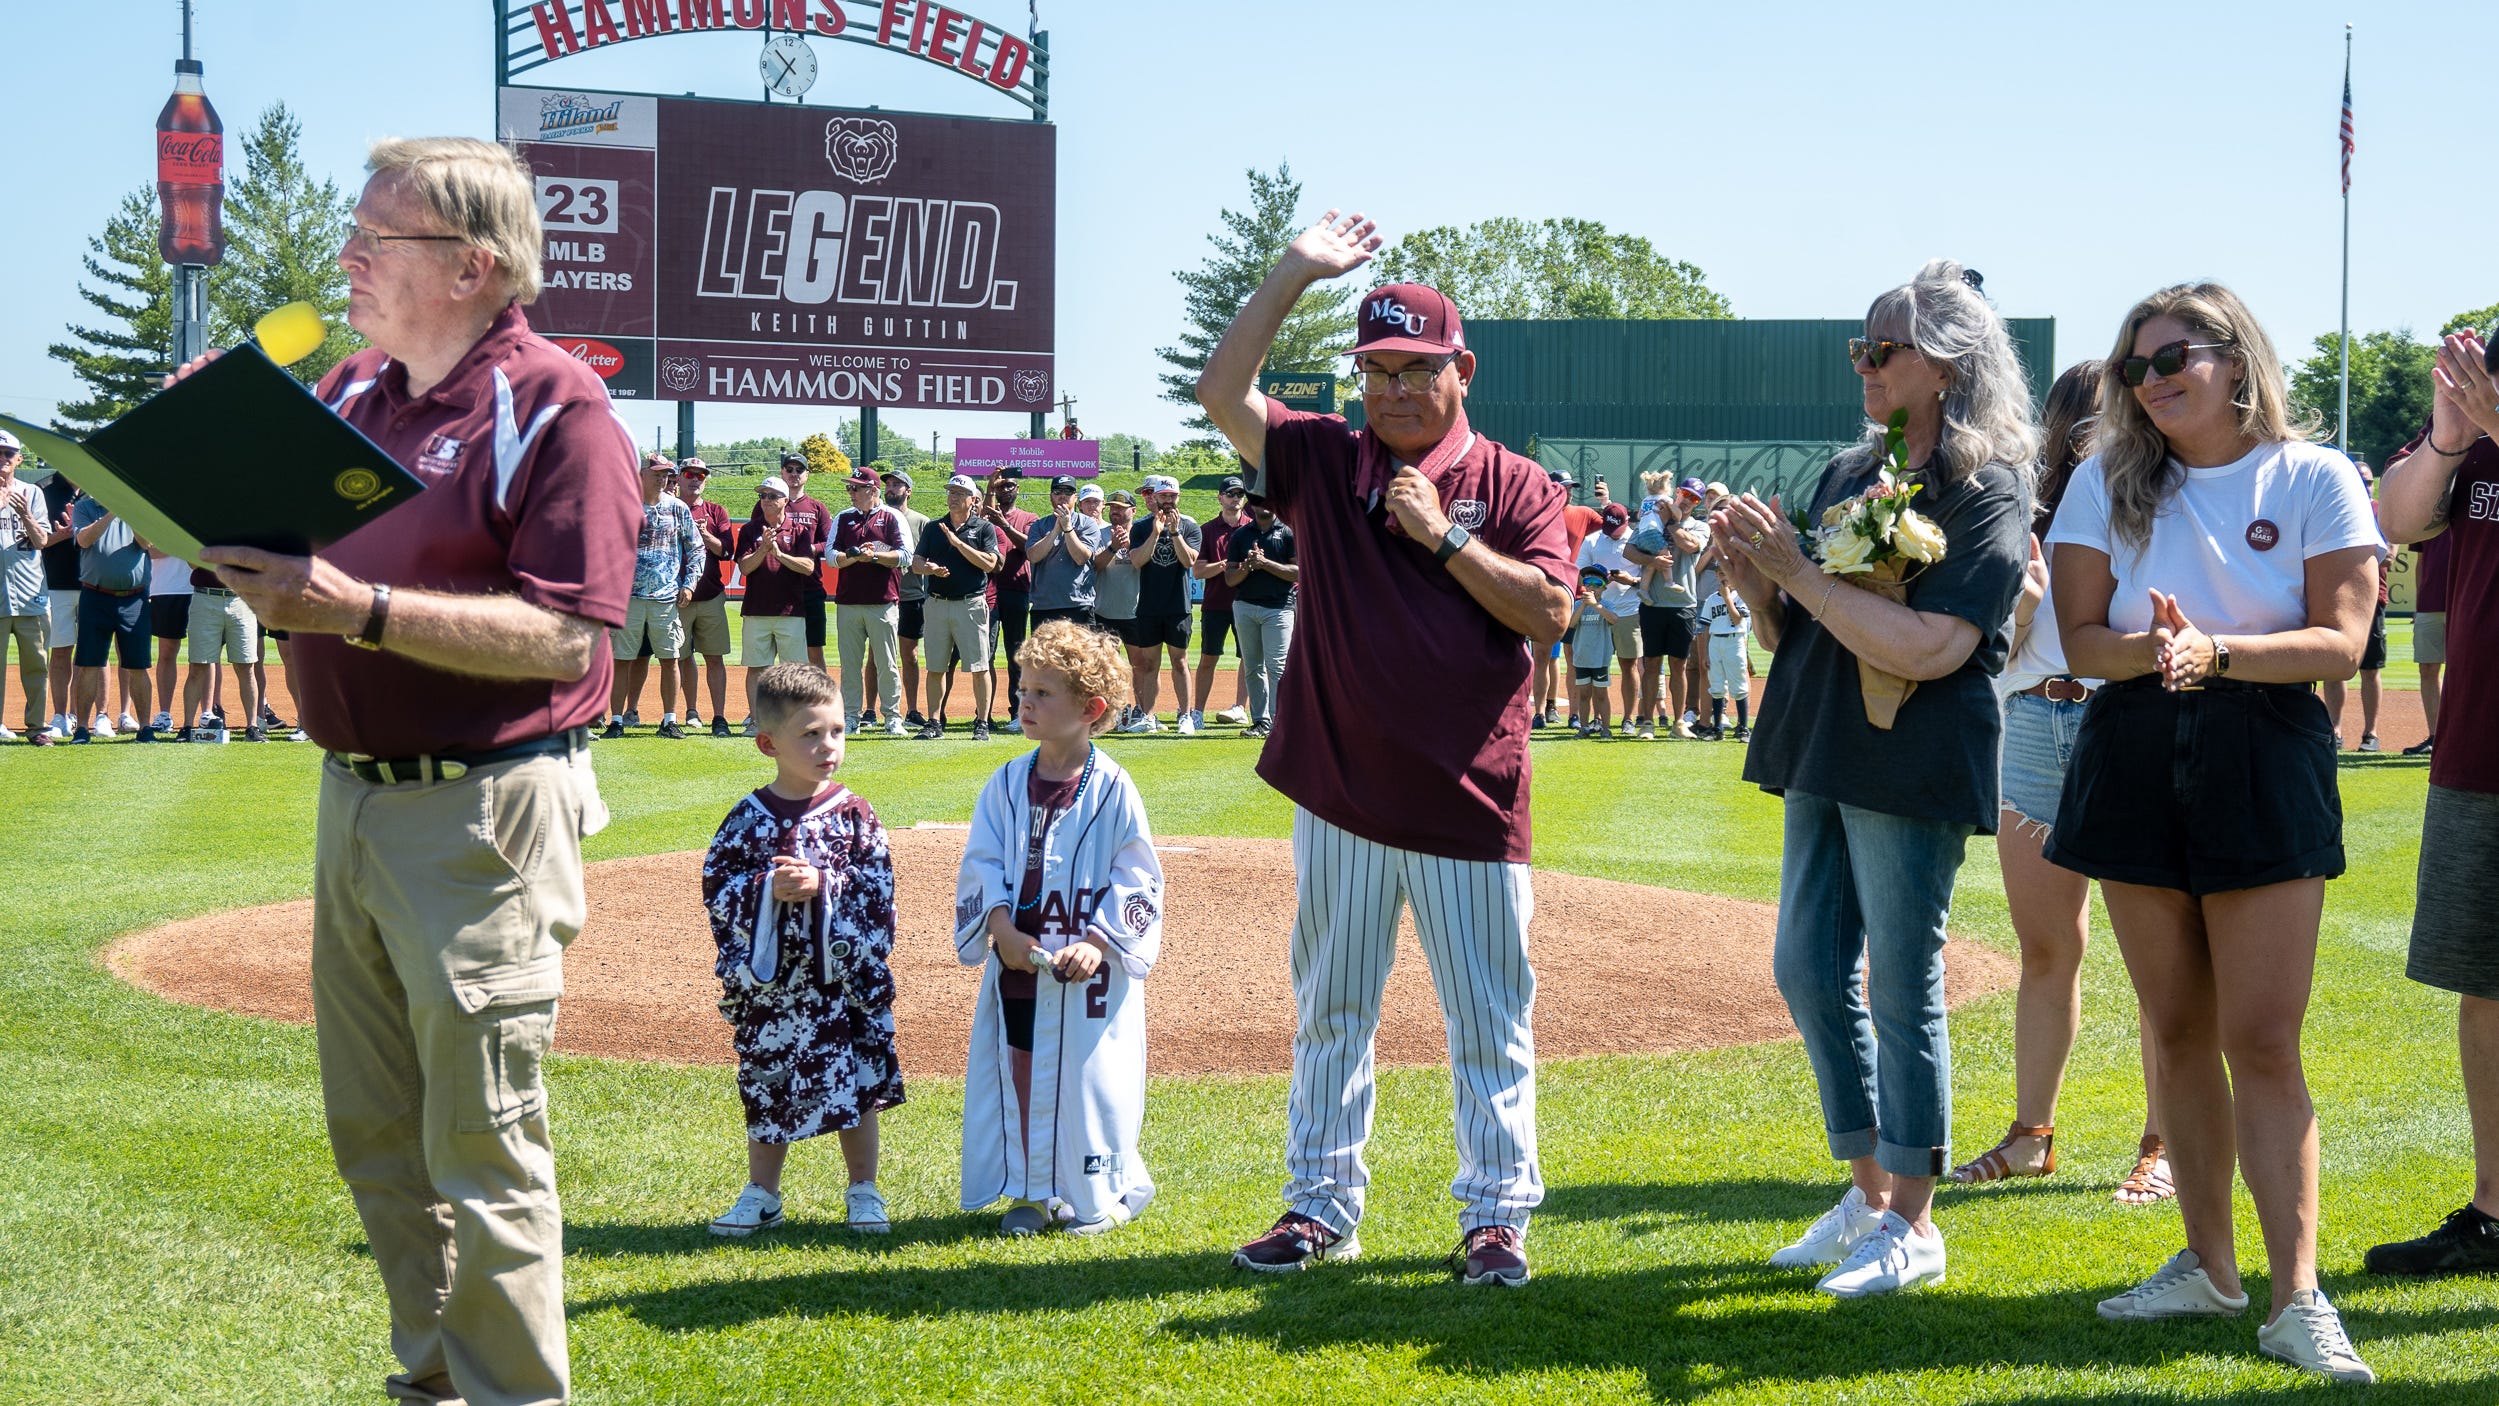   
																Scenes from Keith Guttin's final home game ast Missouri State head baseball coach 
															 